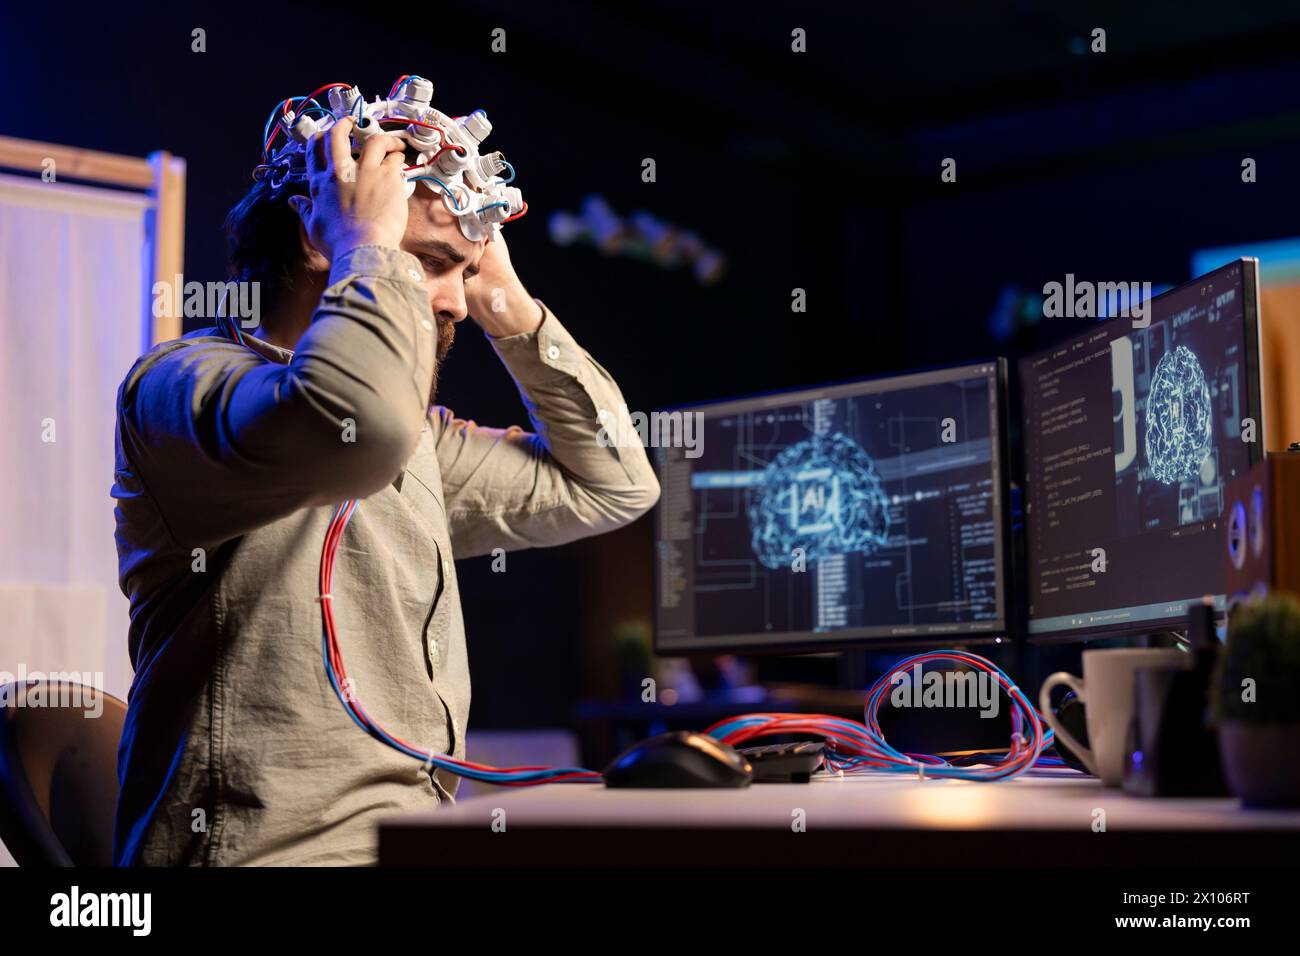 Computer scientist puts EEG headset on, starting mind upload process, trying to gain bionic powers. Man using high tech neuroscientific gear to transfer consciousness into cyberspace Stock Photo